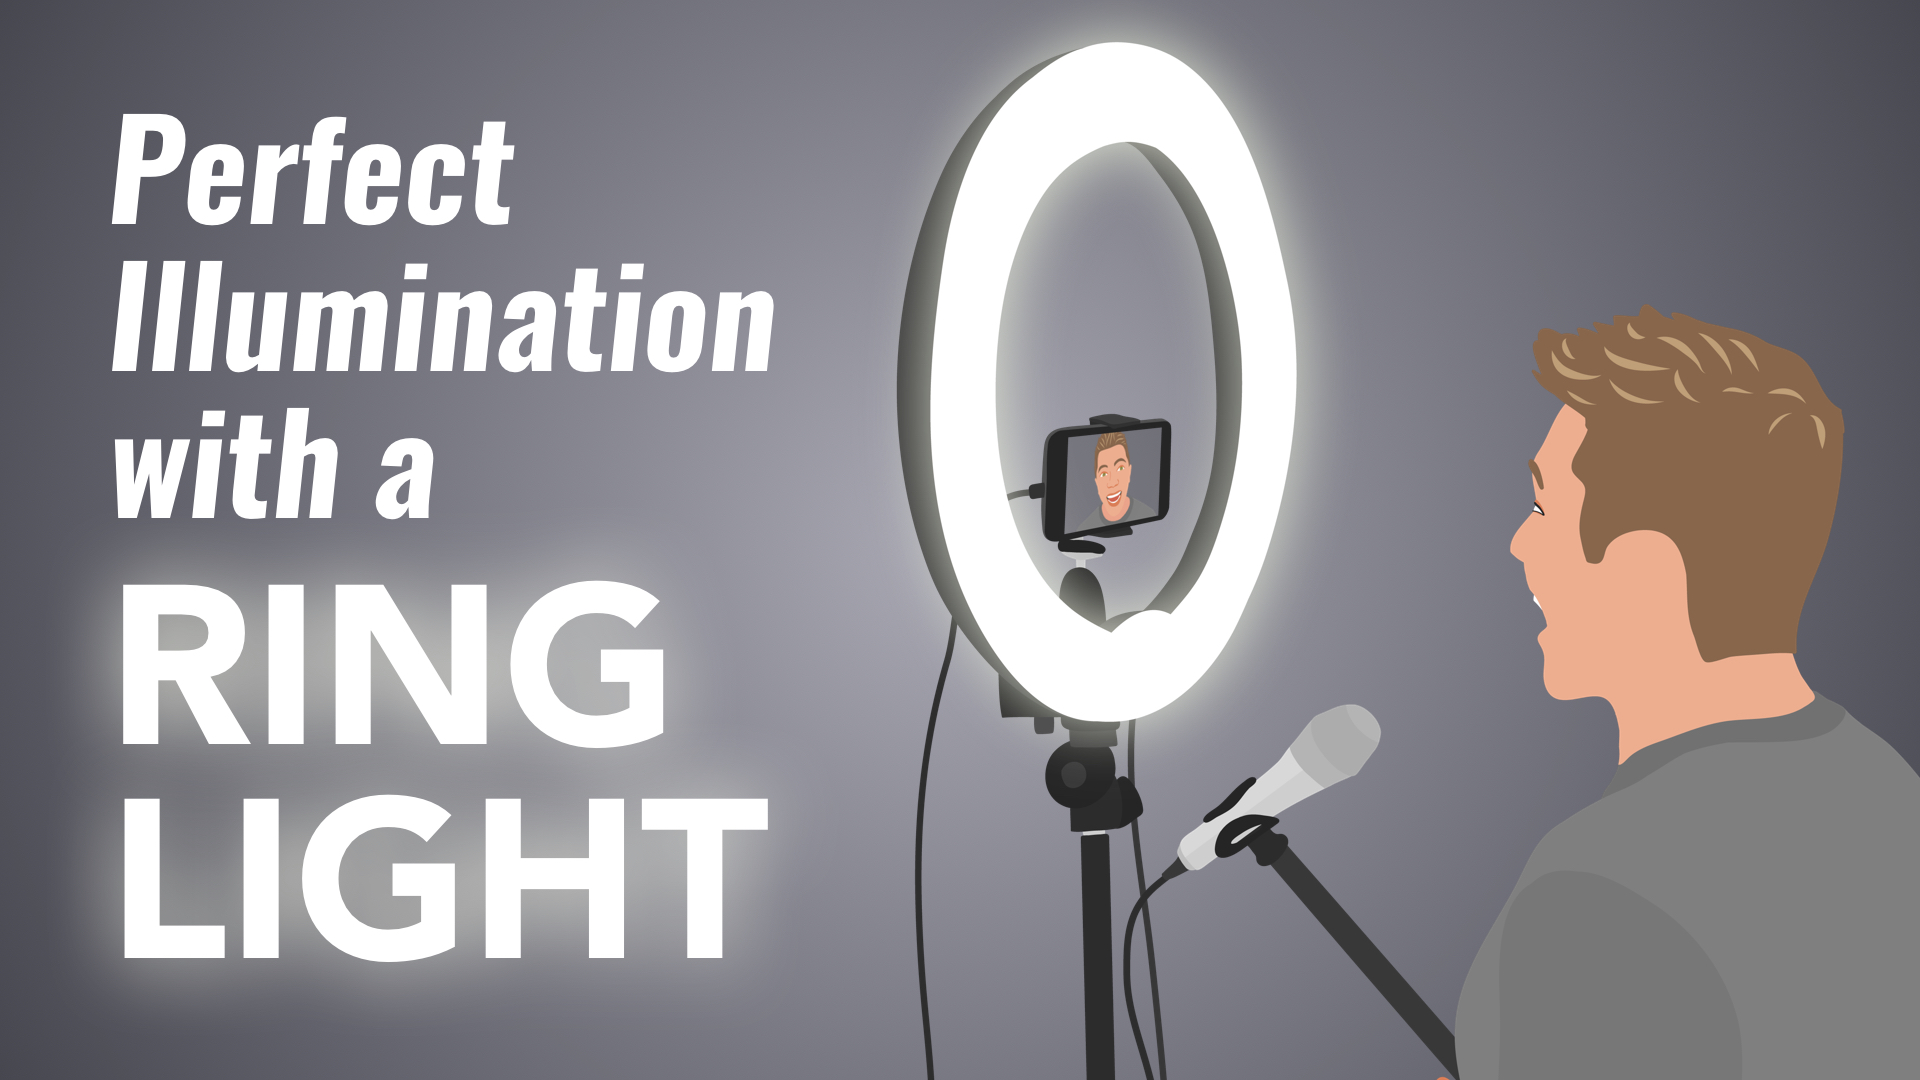 Creative Phone Photo Projects to Do With Your Ring Light – KobraTech